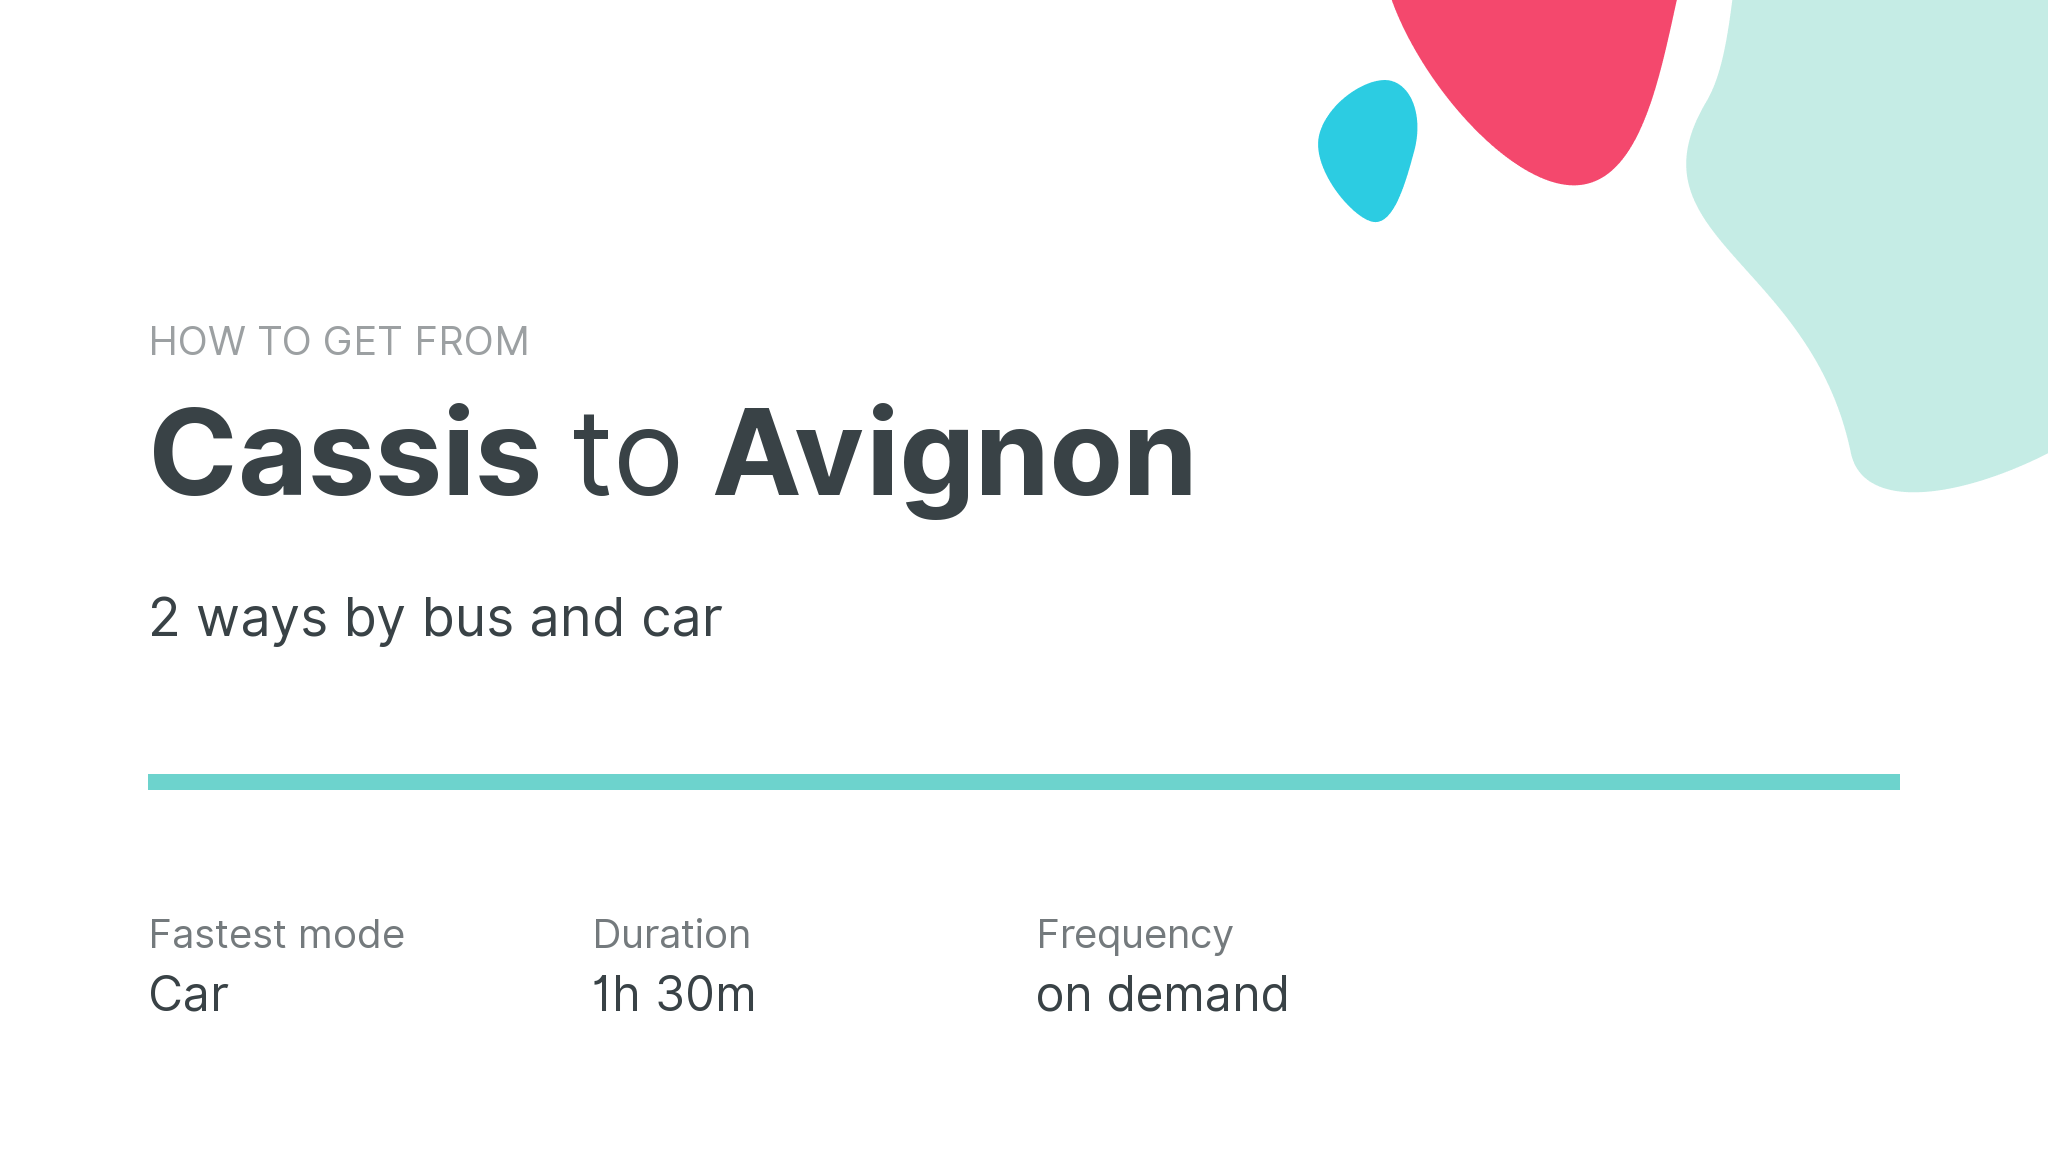 How do I get from Cassis to Avignon